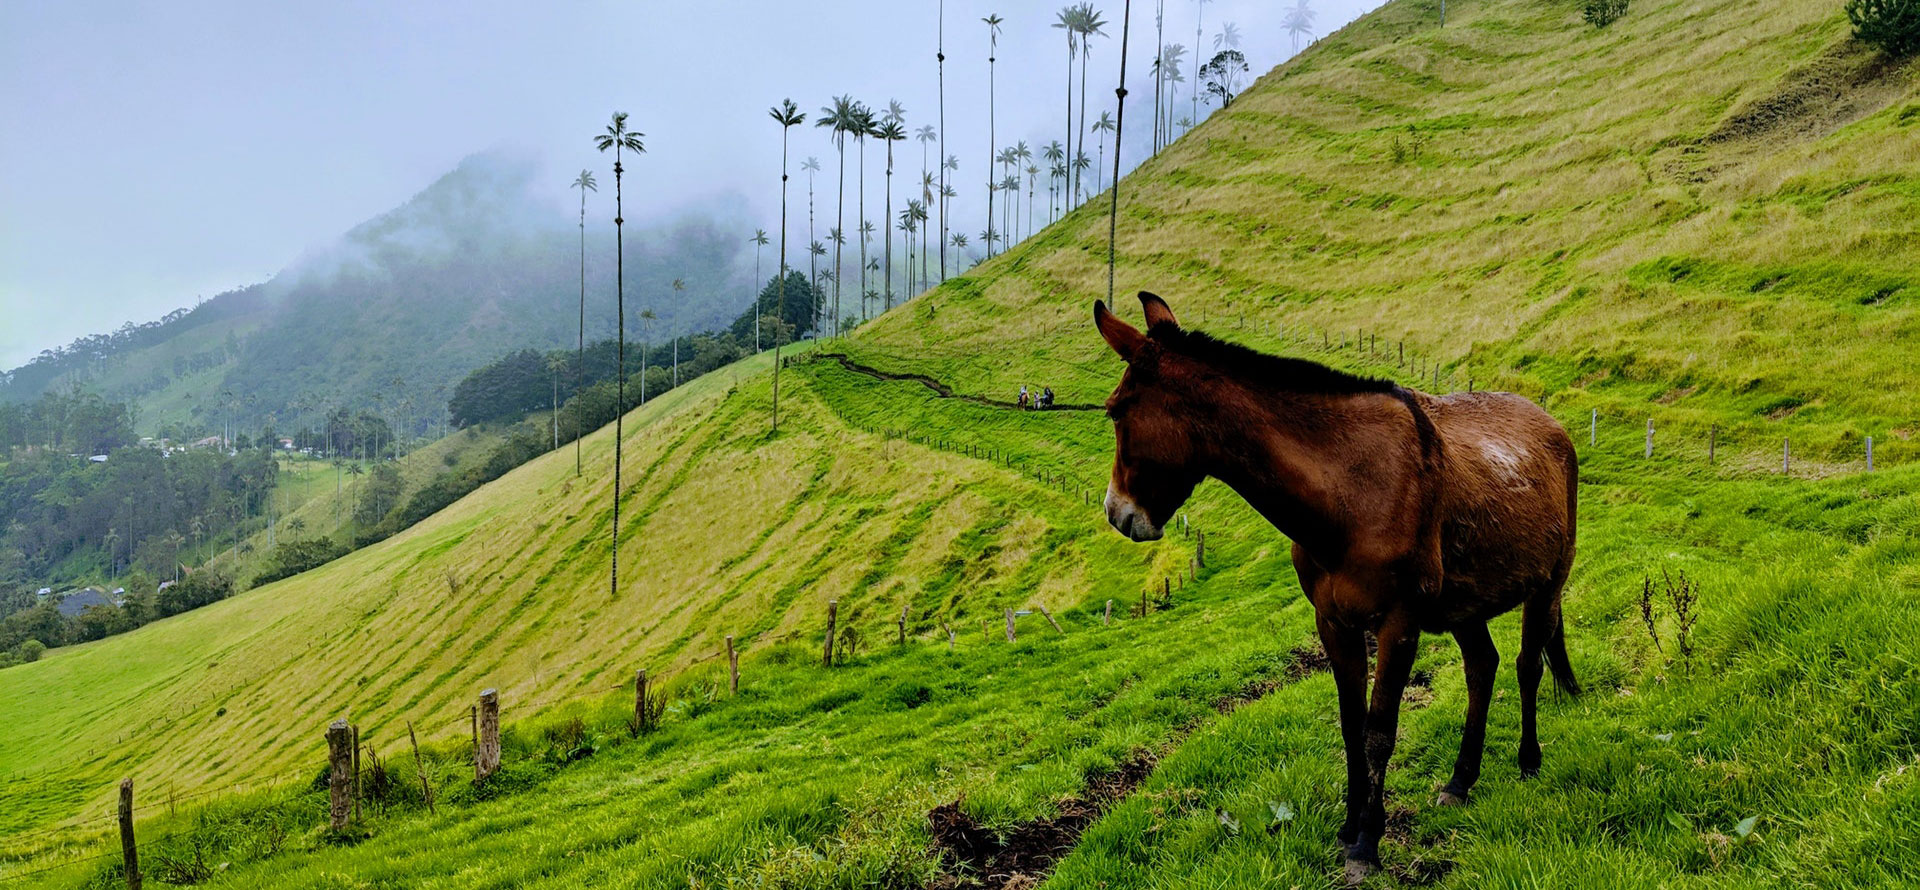 Landscape in Colombia.